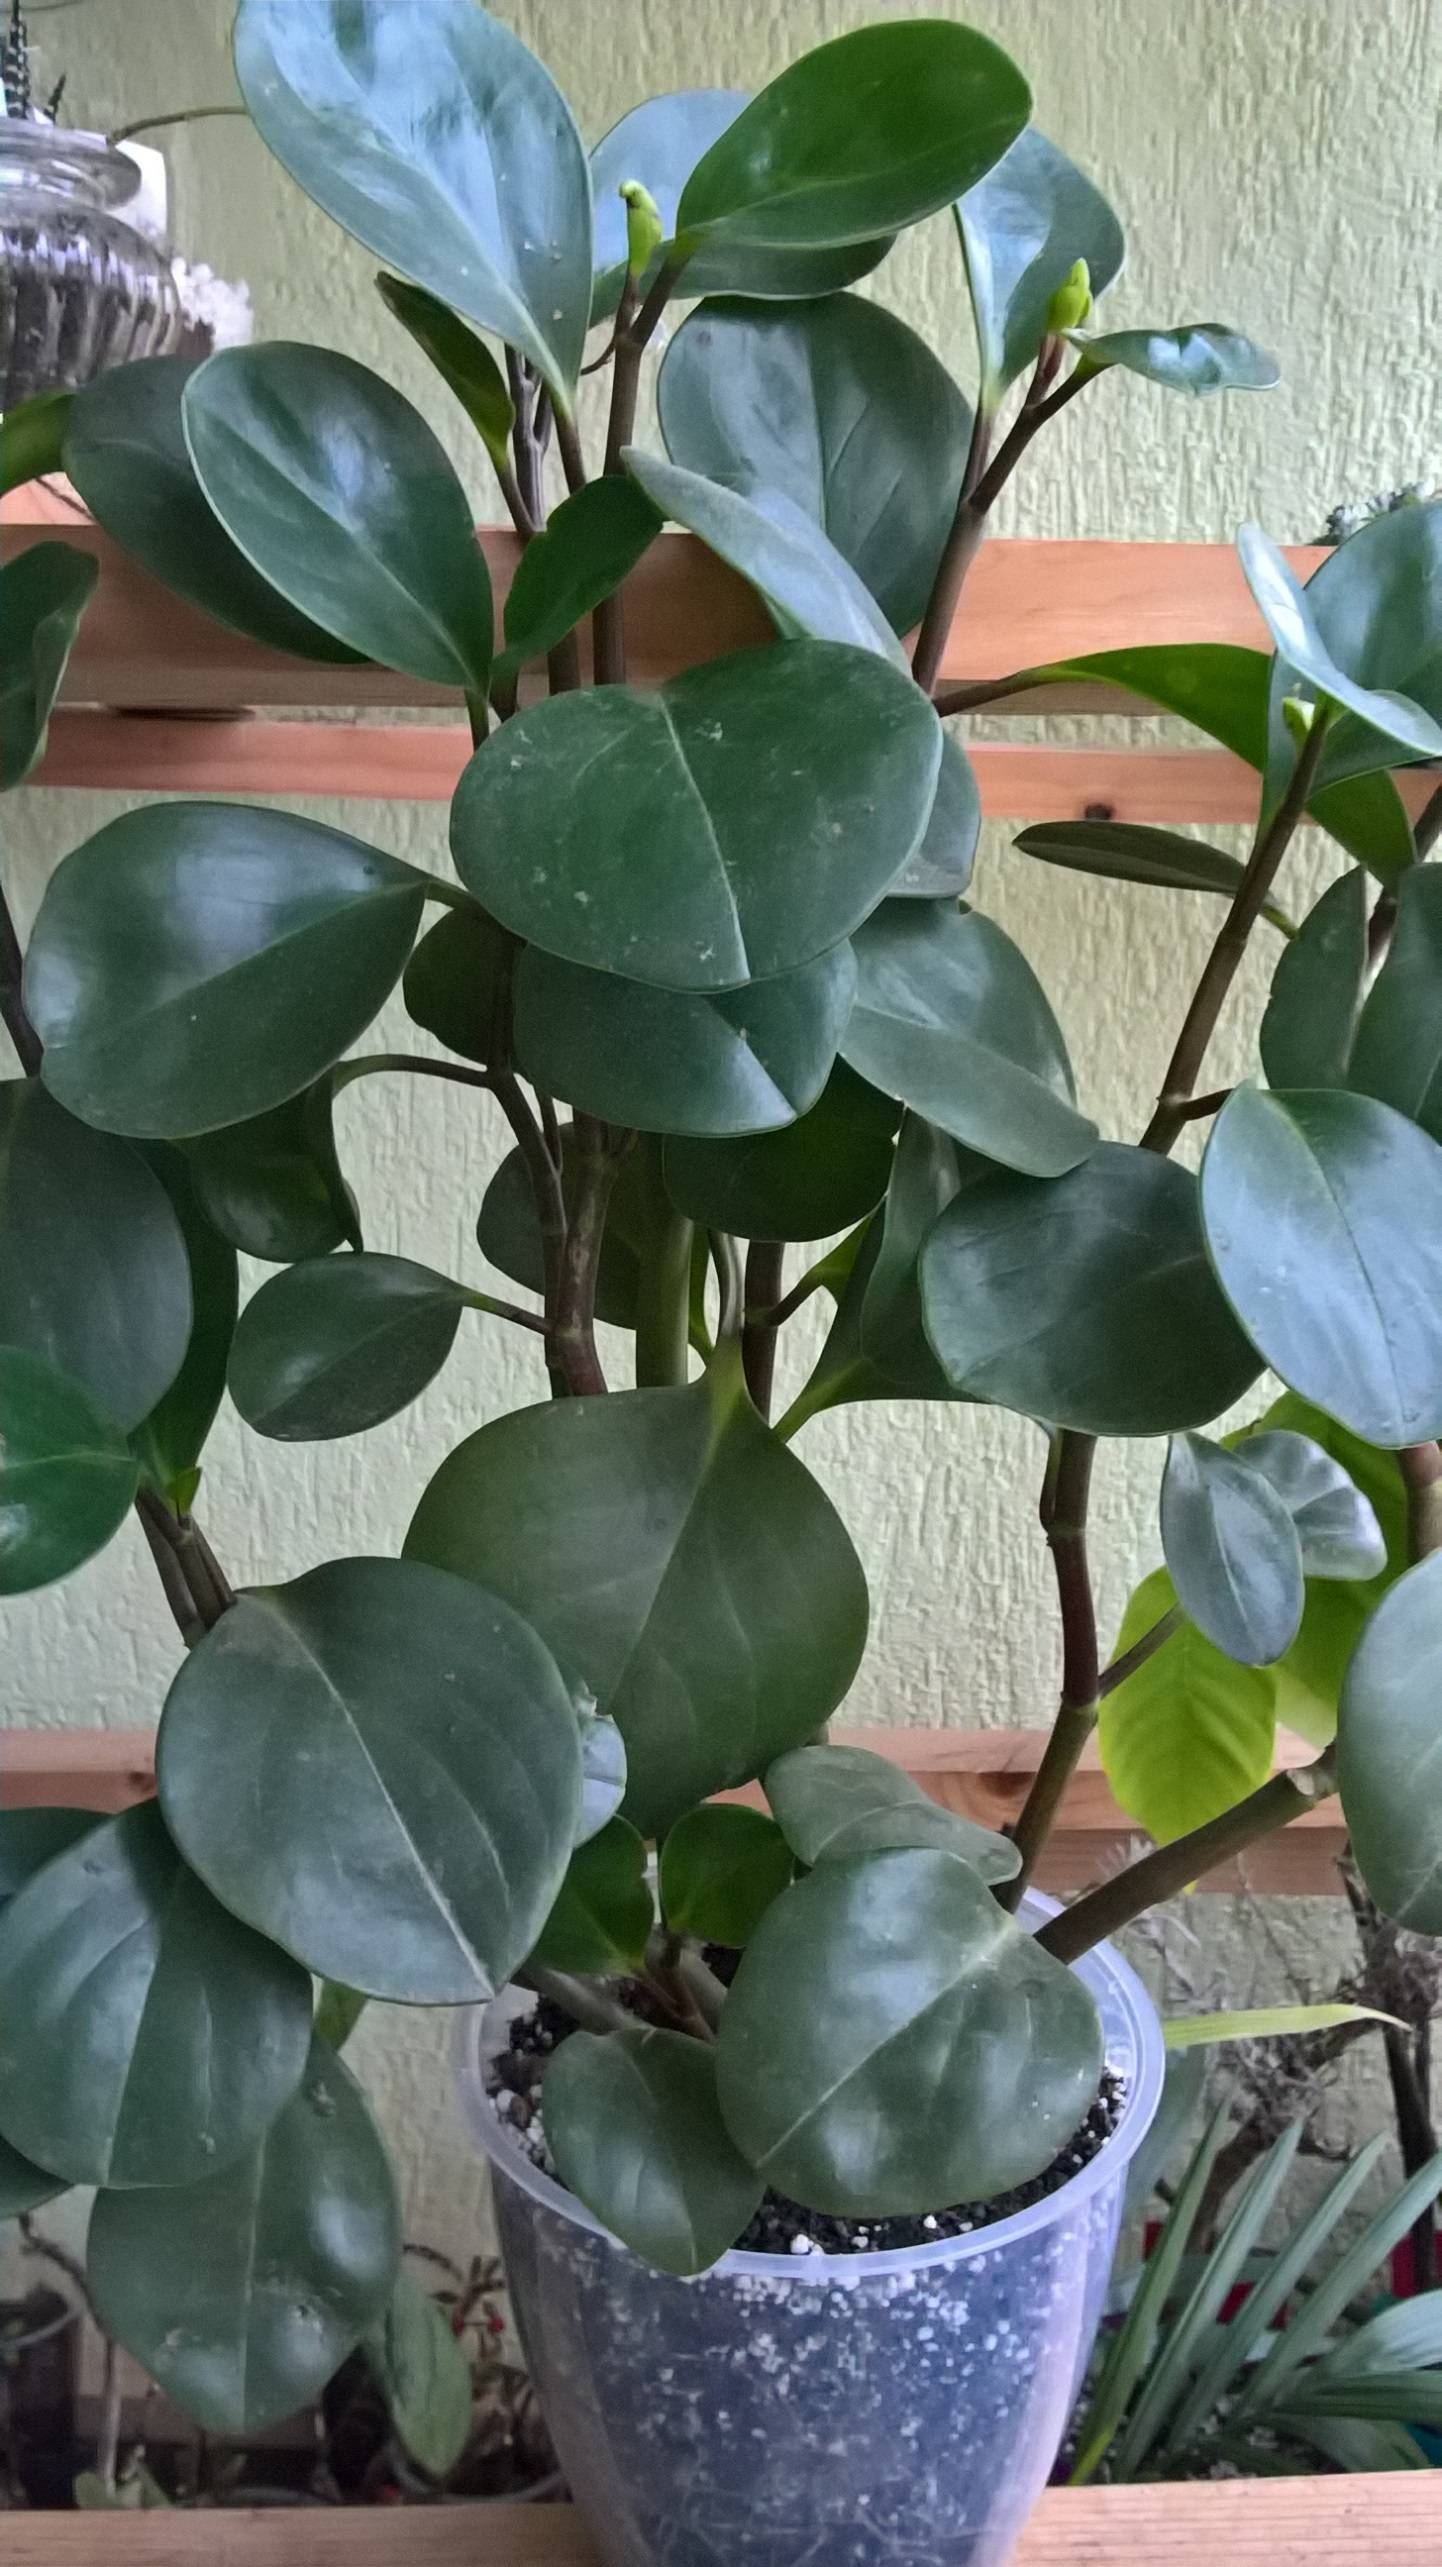 identification - What is the name of this potted plant with large ...